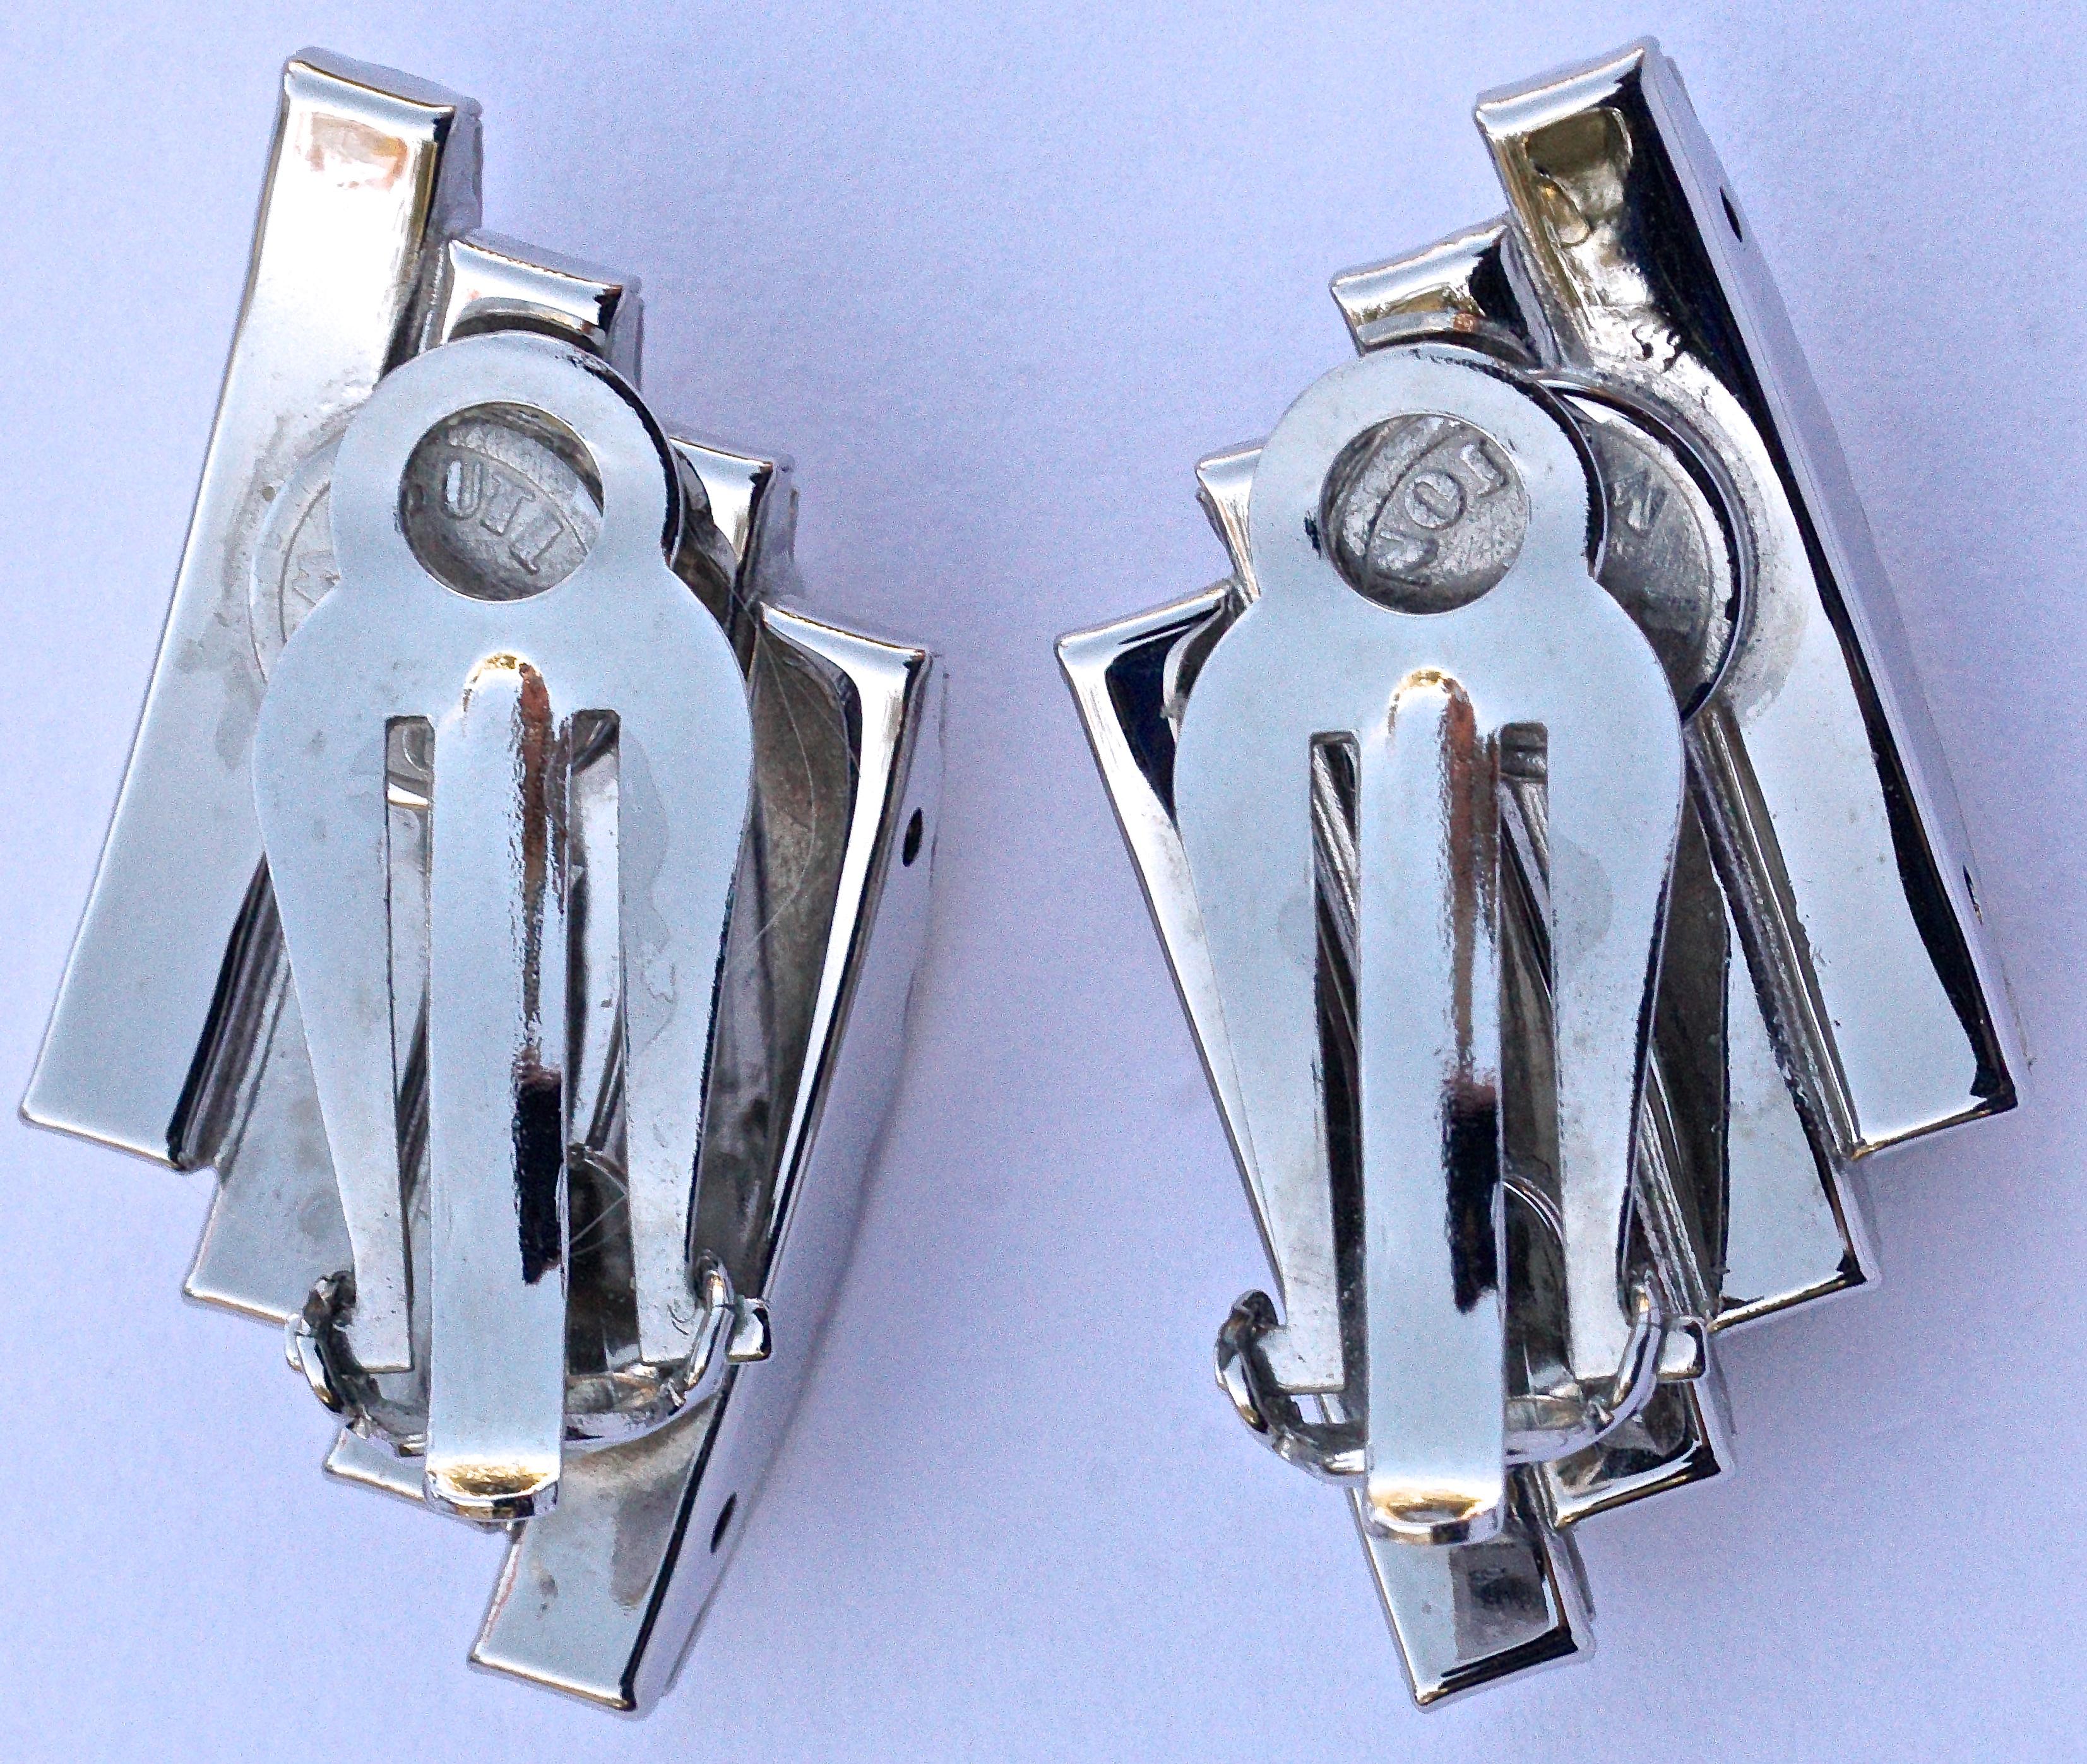 Stunning Butler and Wilson silver tone clip on earrings, featuring four rows of clear channel set crystals. The design is reminiscent of Art Deco 1930s jewellery made in Germany by companies such as Schreiber & Hiller. Measuring length 3.2cm / 1.25